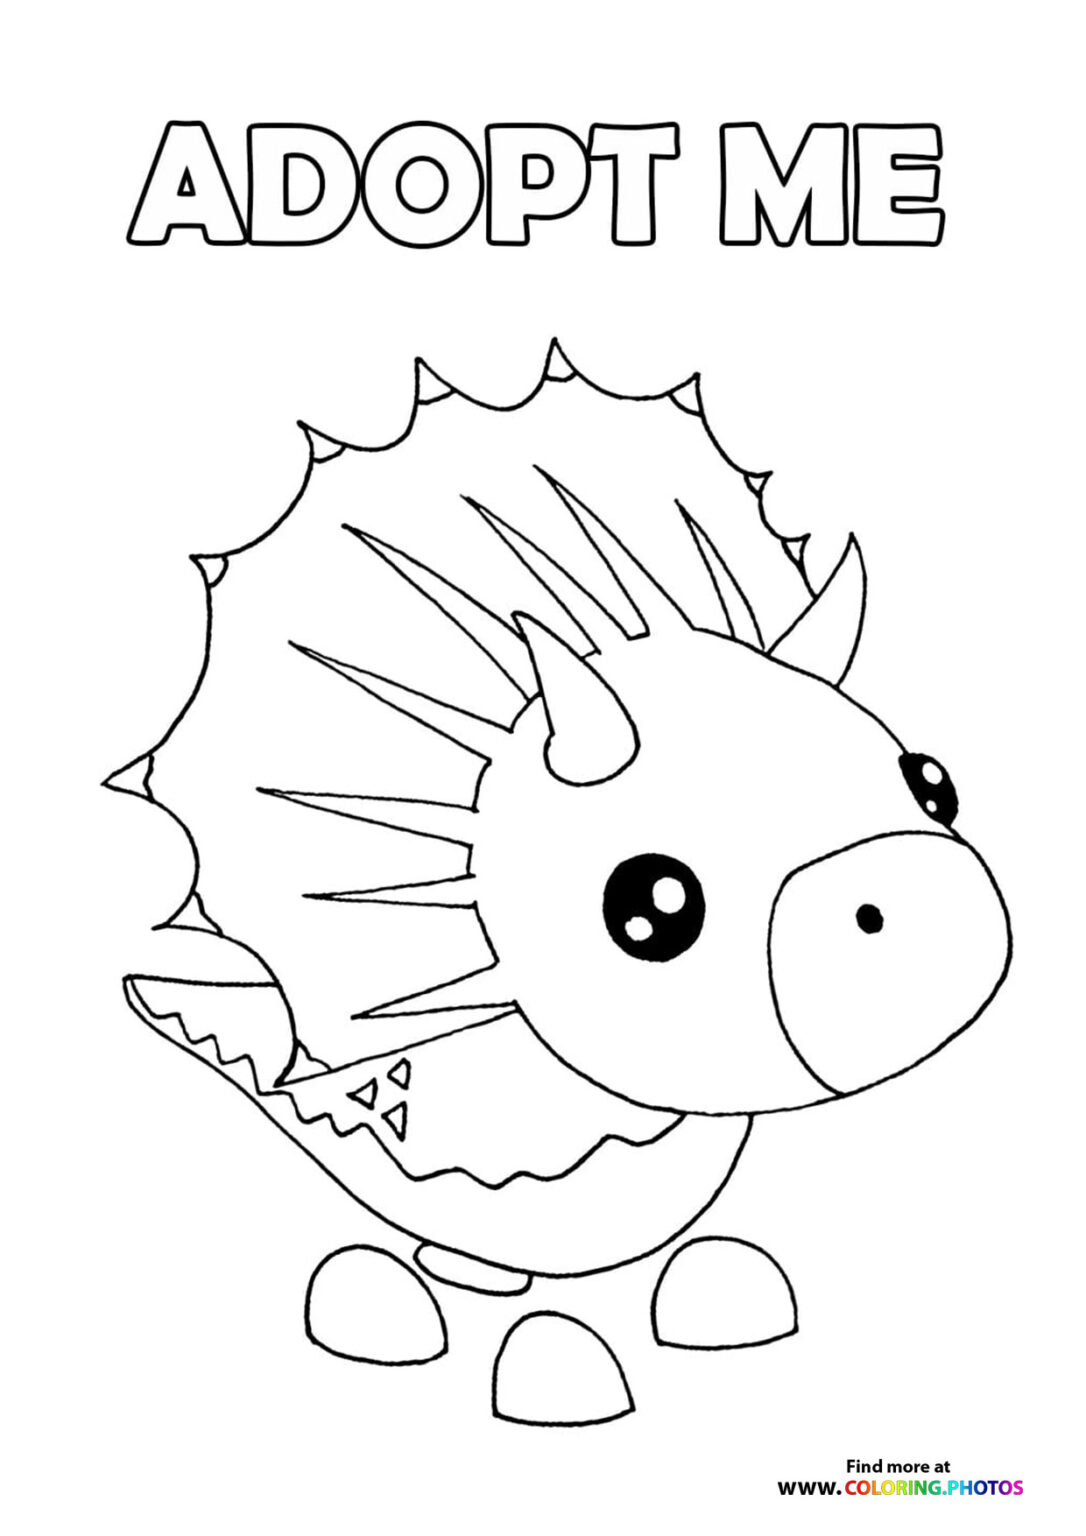 Adopt me Roblox friends Coloring Pages for kids